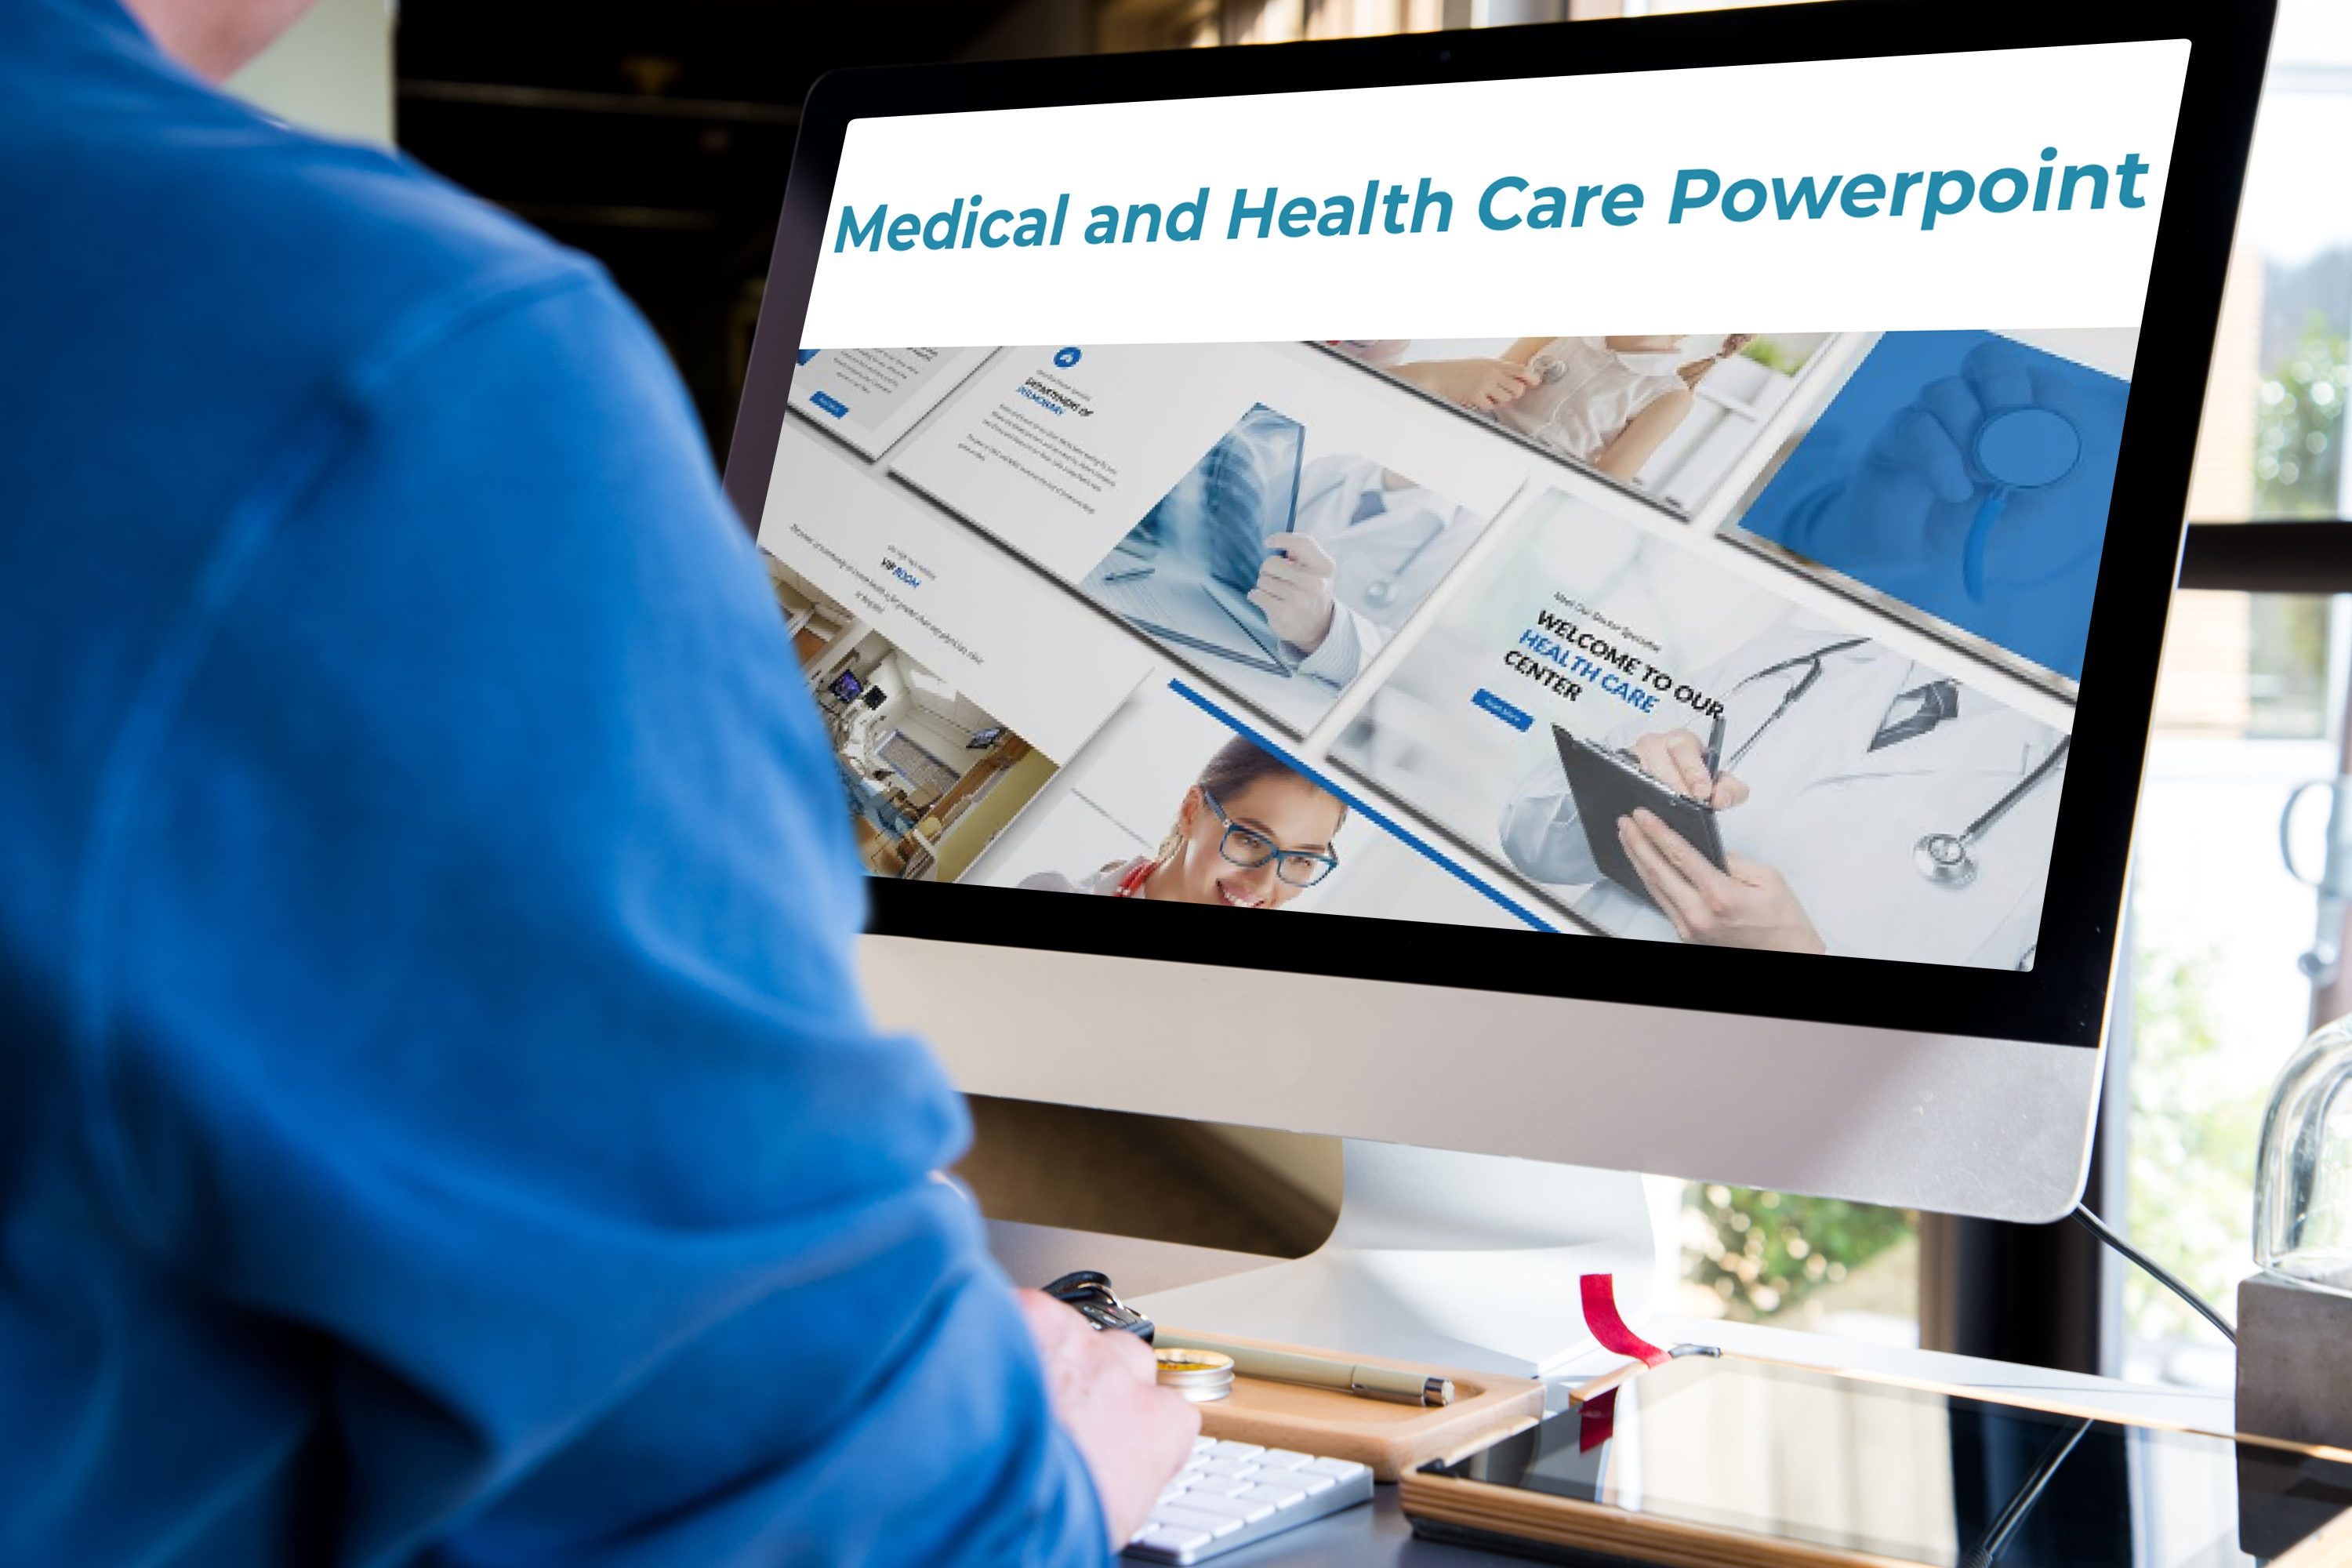 Desktop option of the Medical and Health Care Powerpoint.